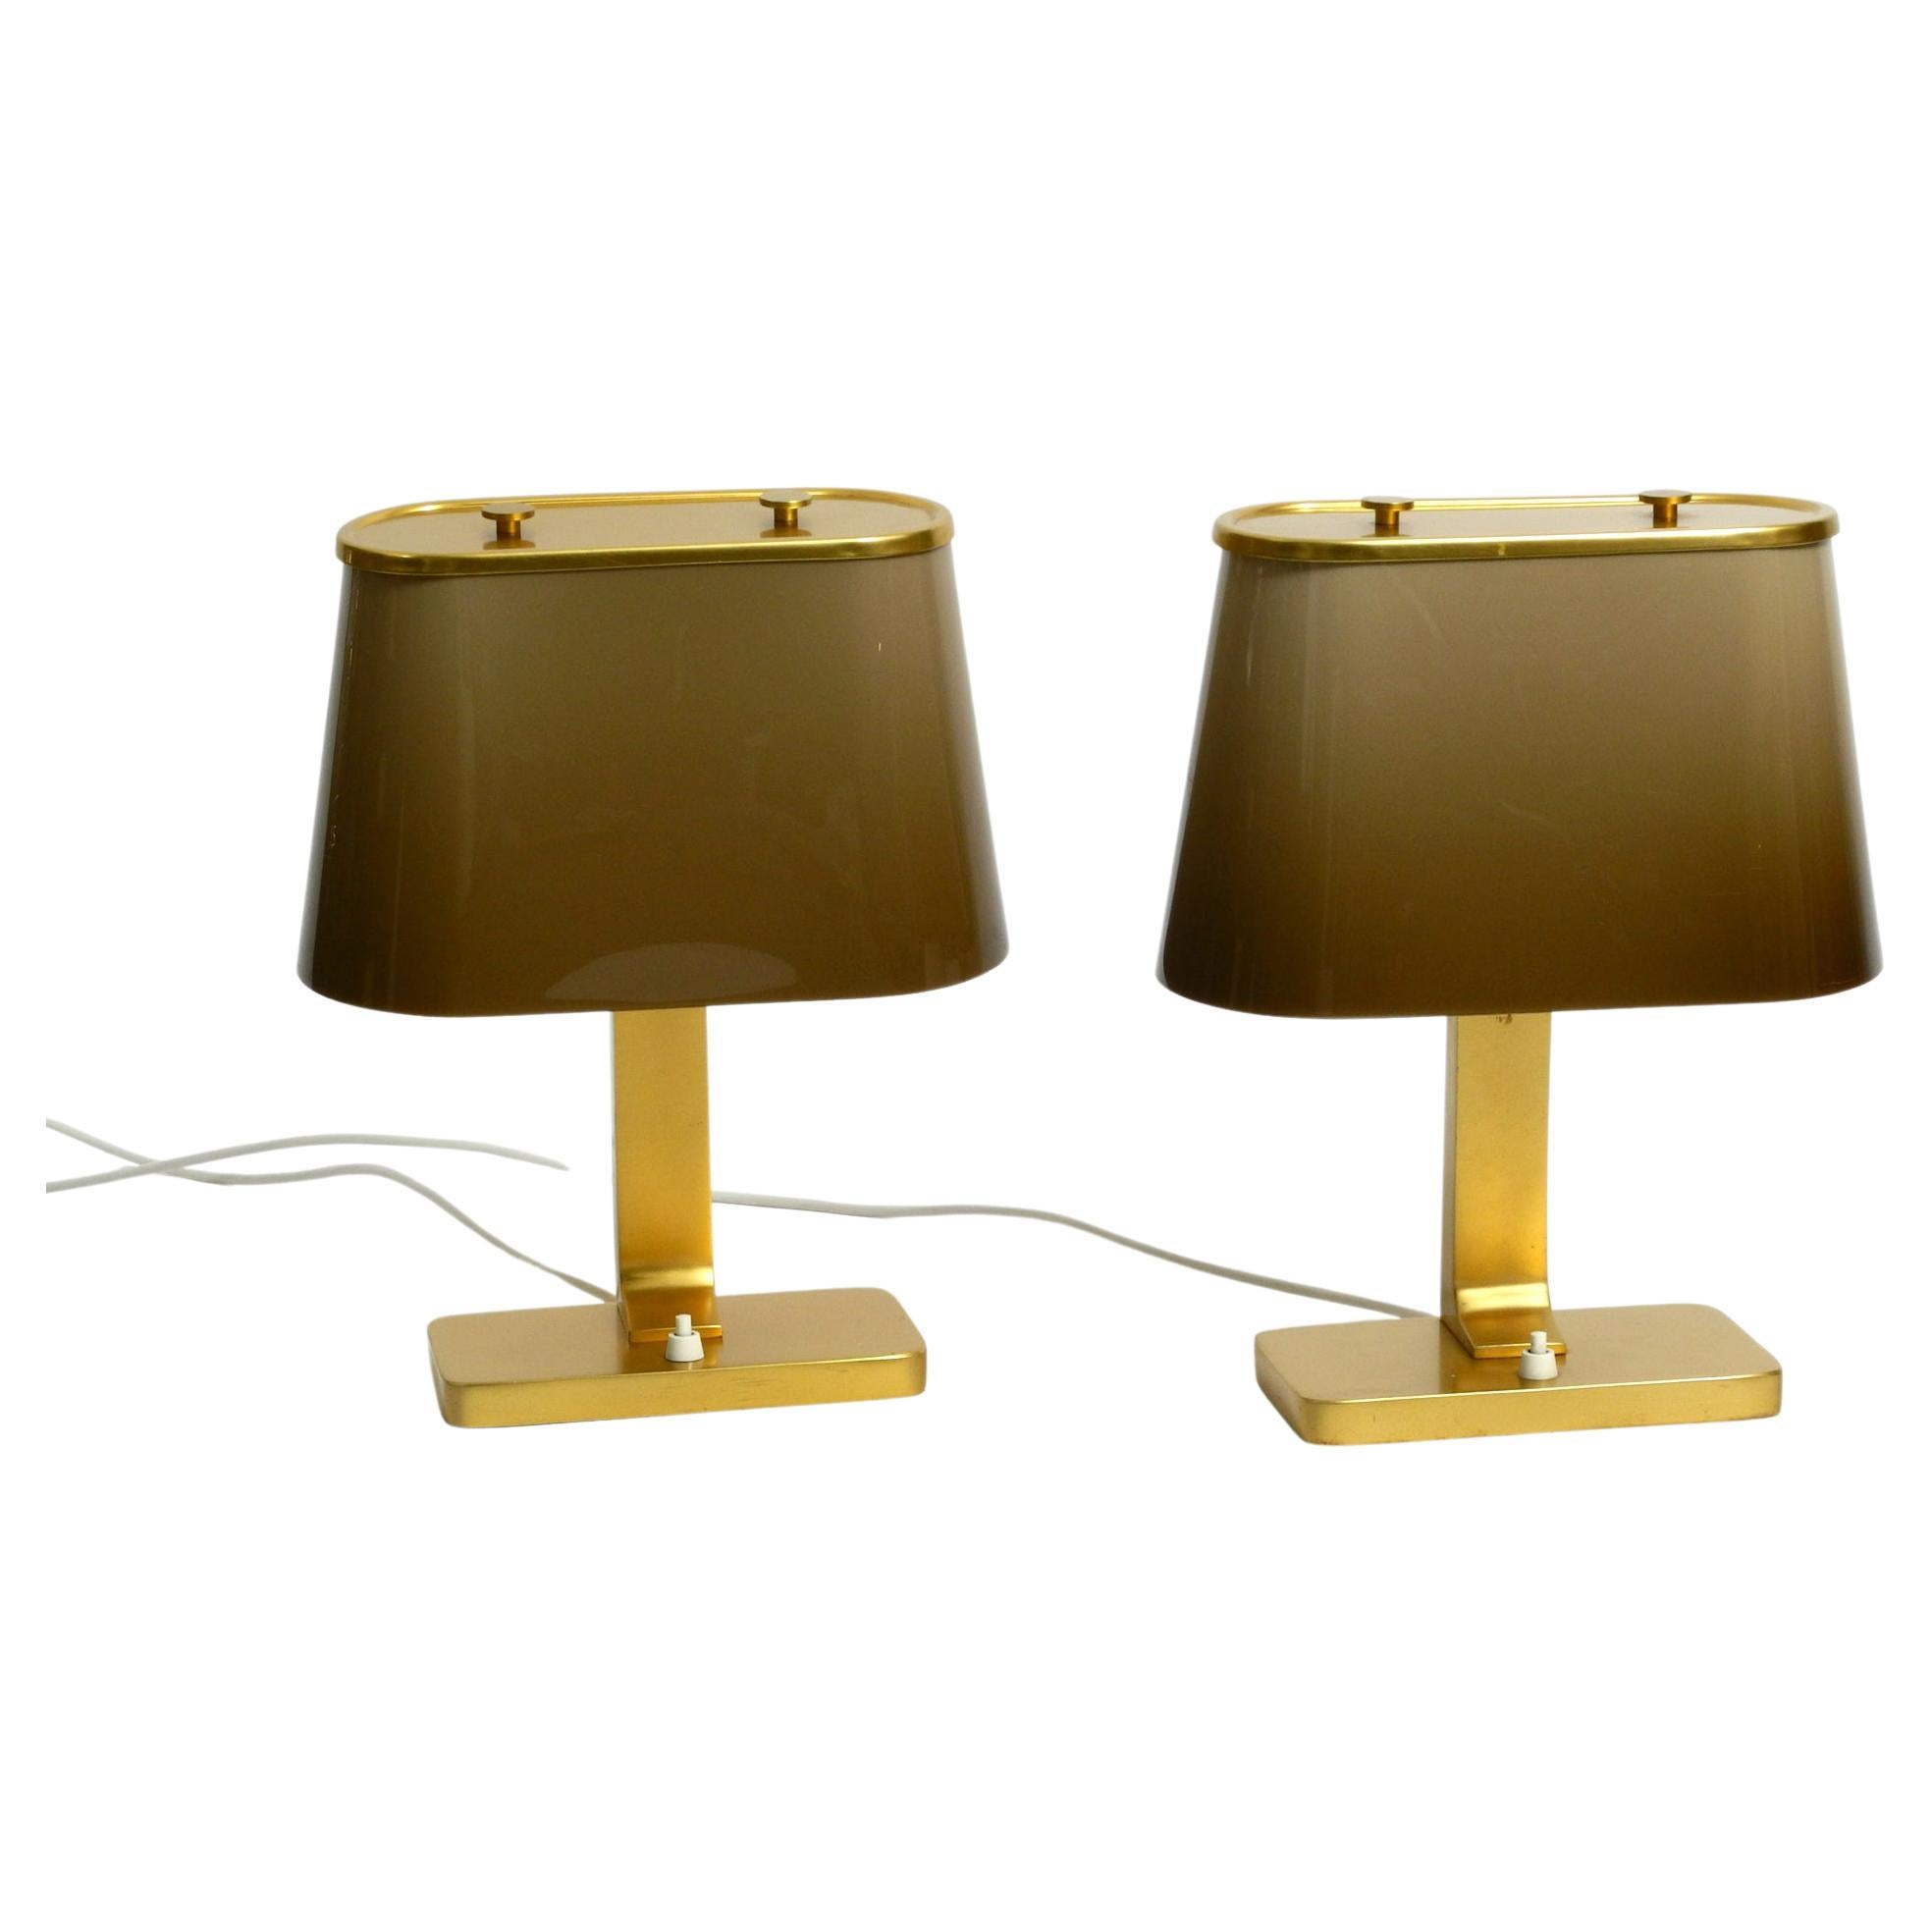 Pair of Large 1960s Space Age Table Lamps with Plastic Shades from Italy